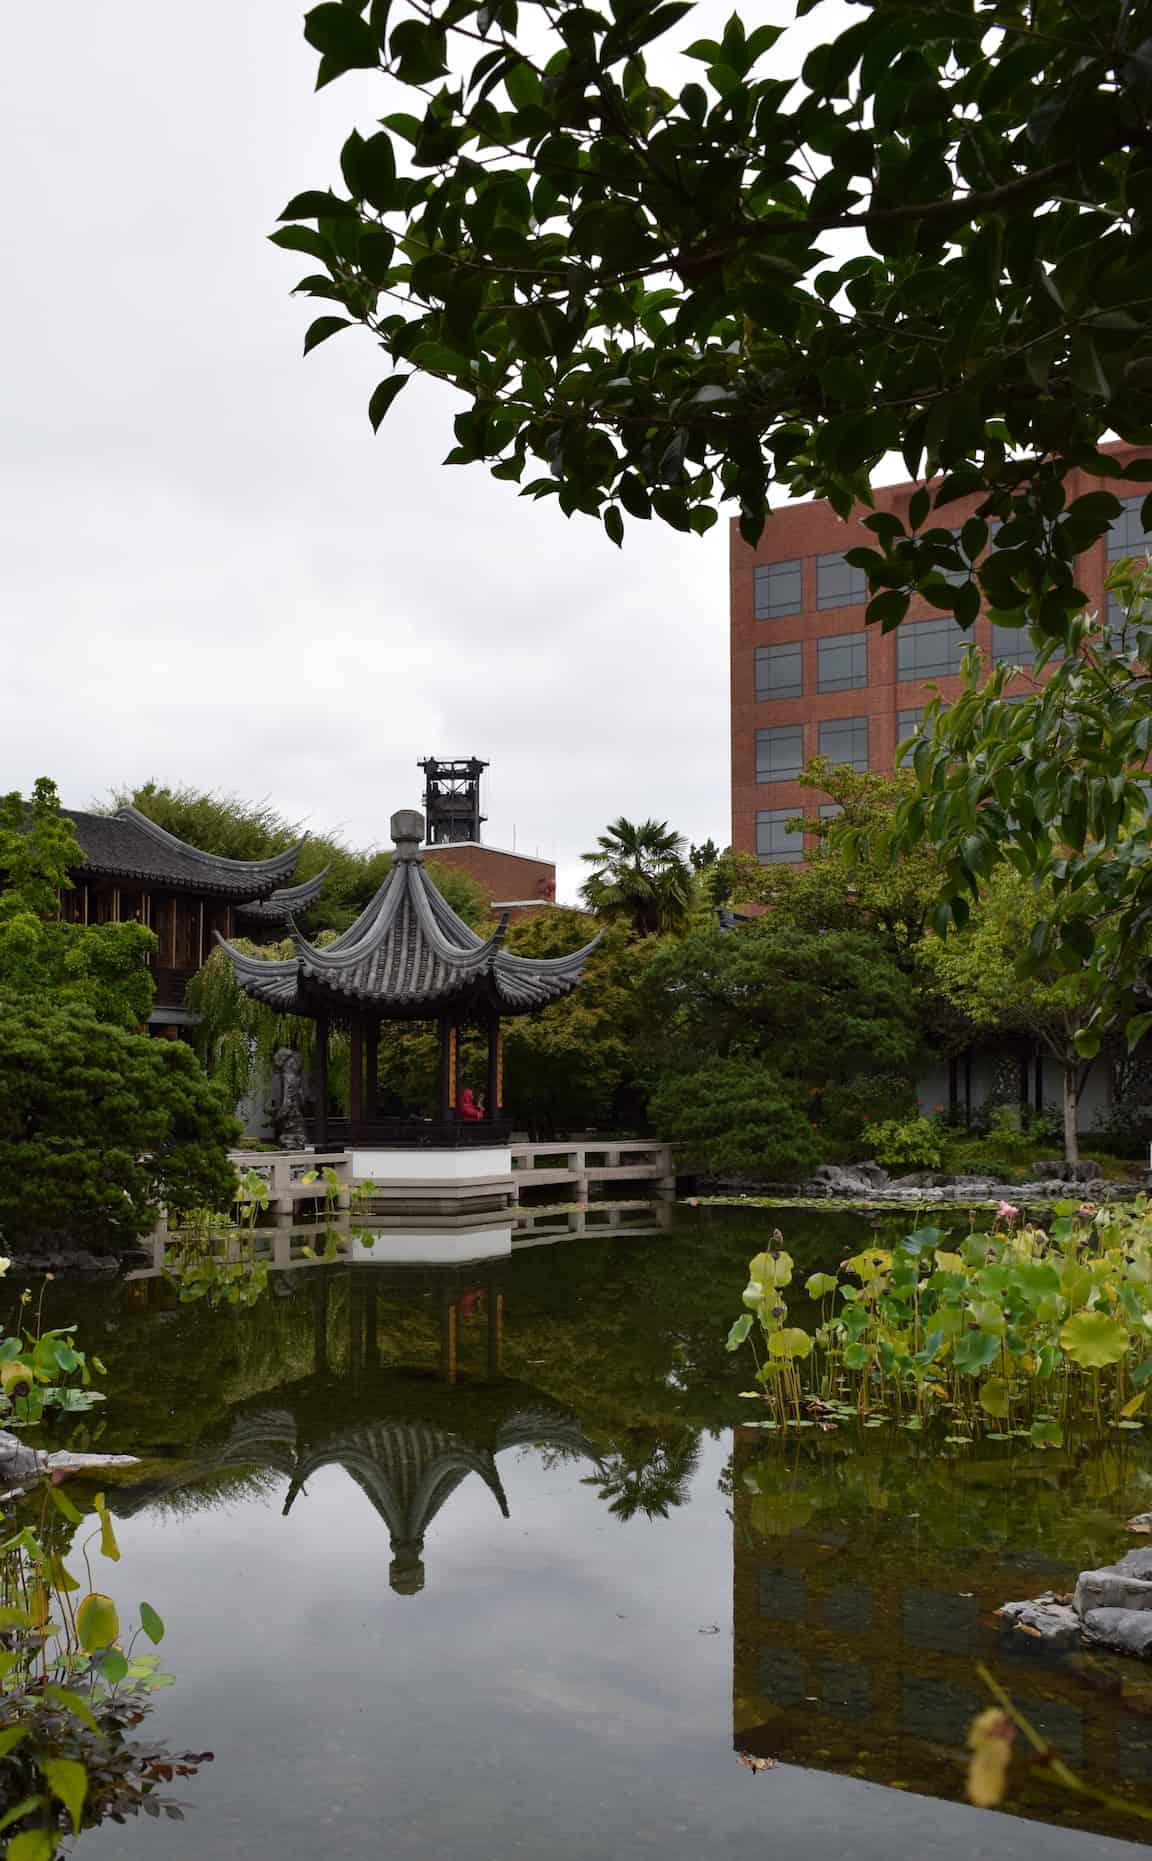 Portland Oregon's Lan Su Chinese Garden is a hidden gem: In the heart of downtown Portland, this peaceful refuge is a destination you definitely want on your Portland itinerary. To & Fro Fam